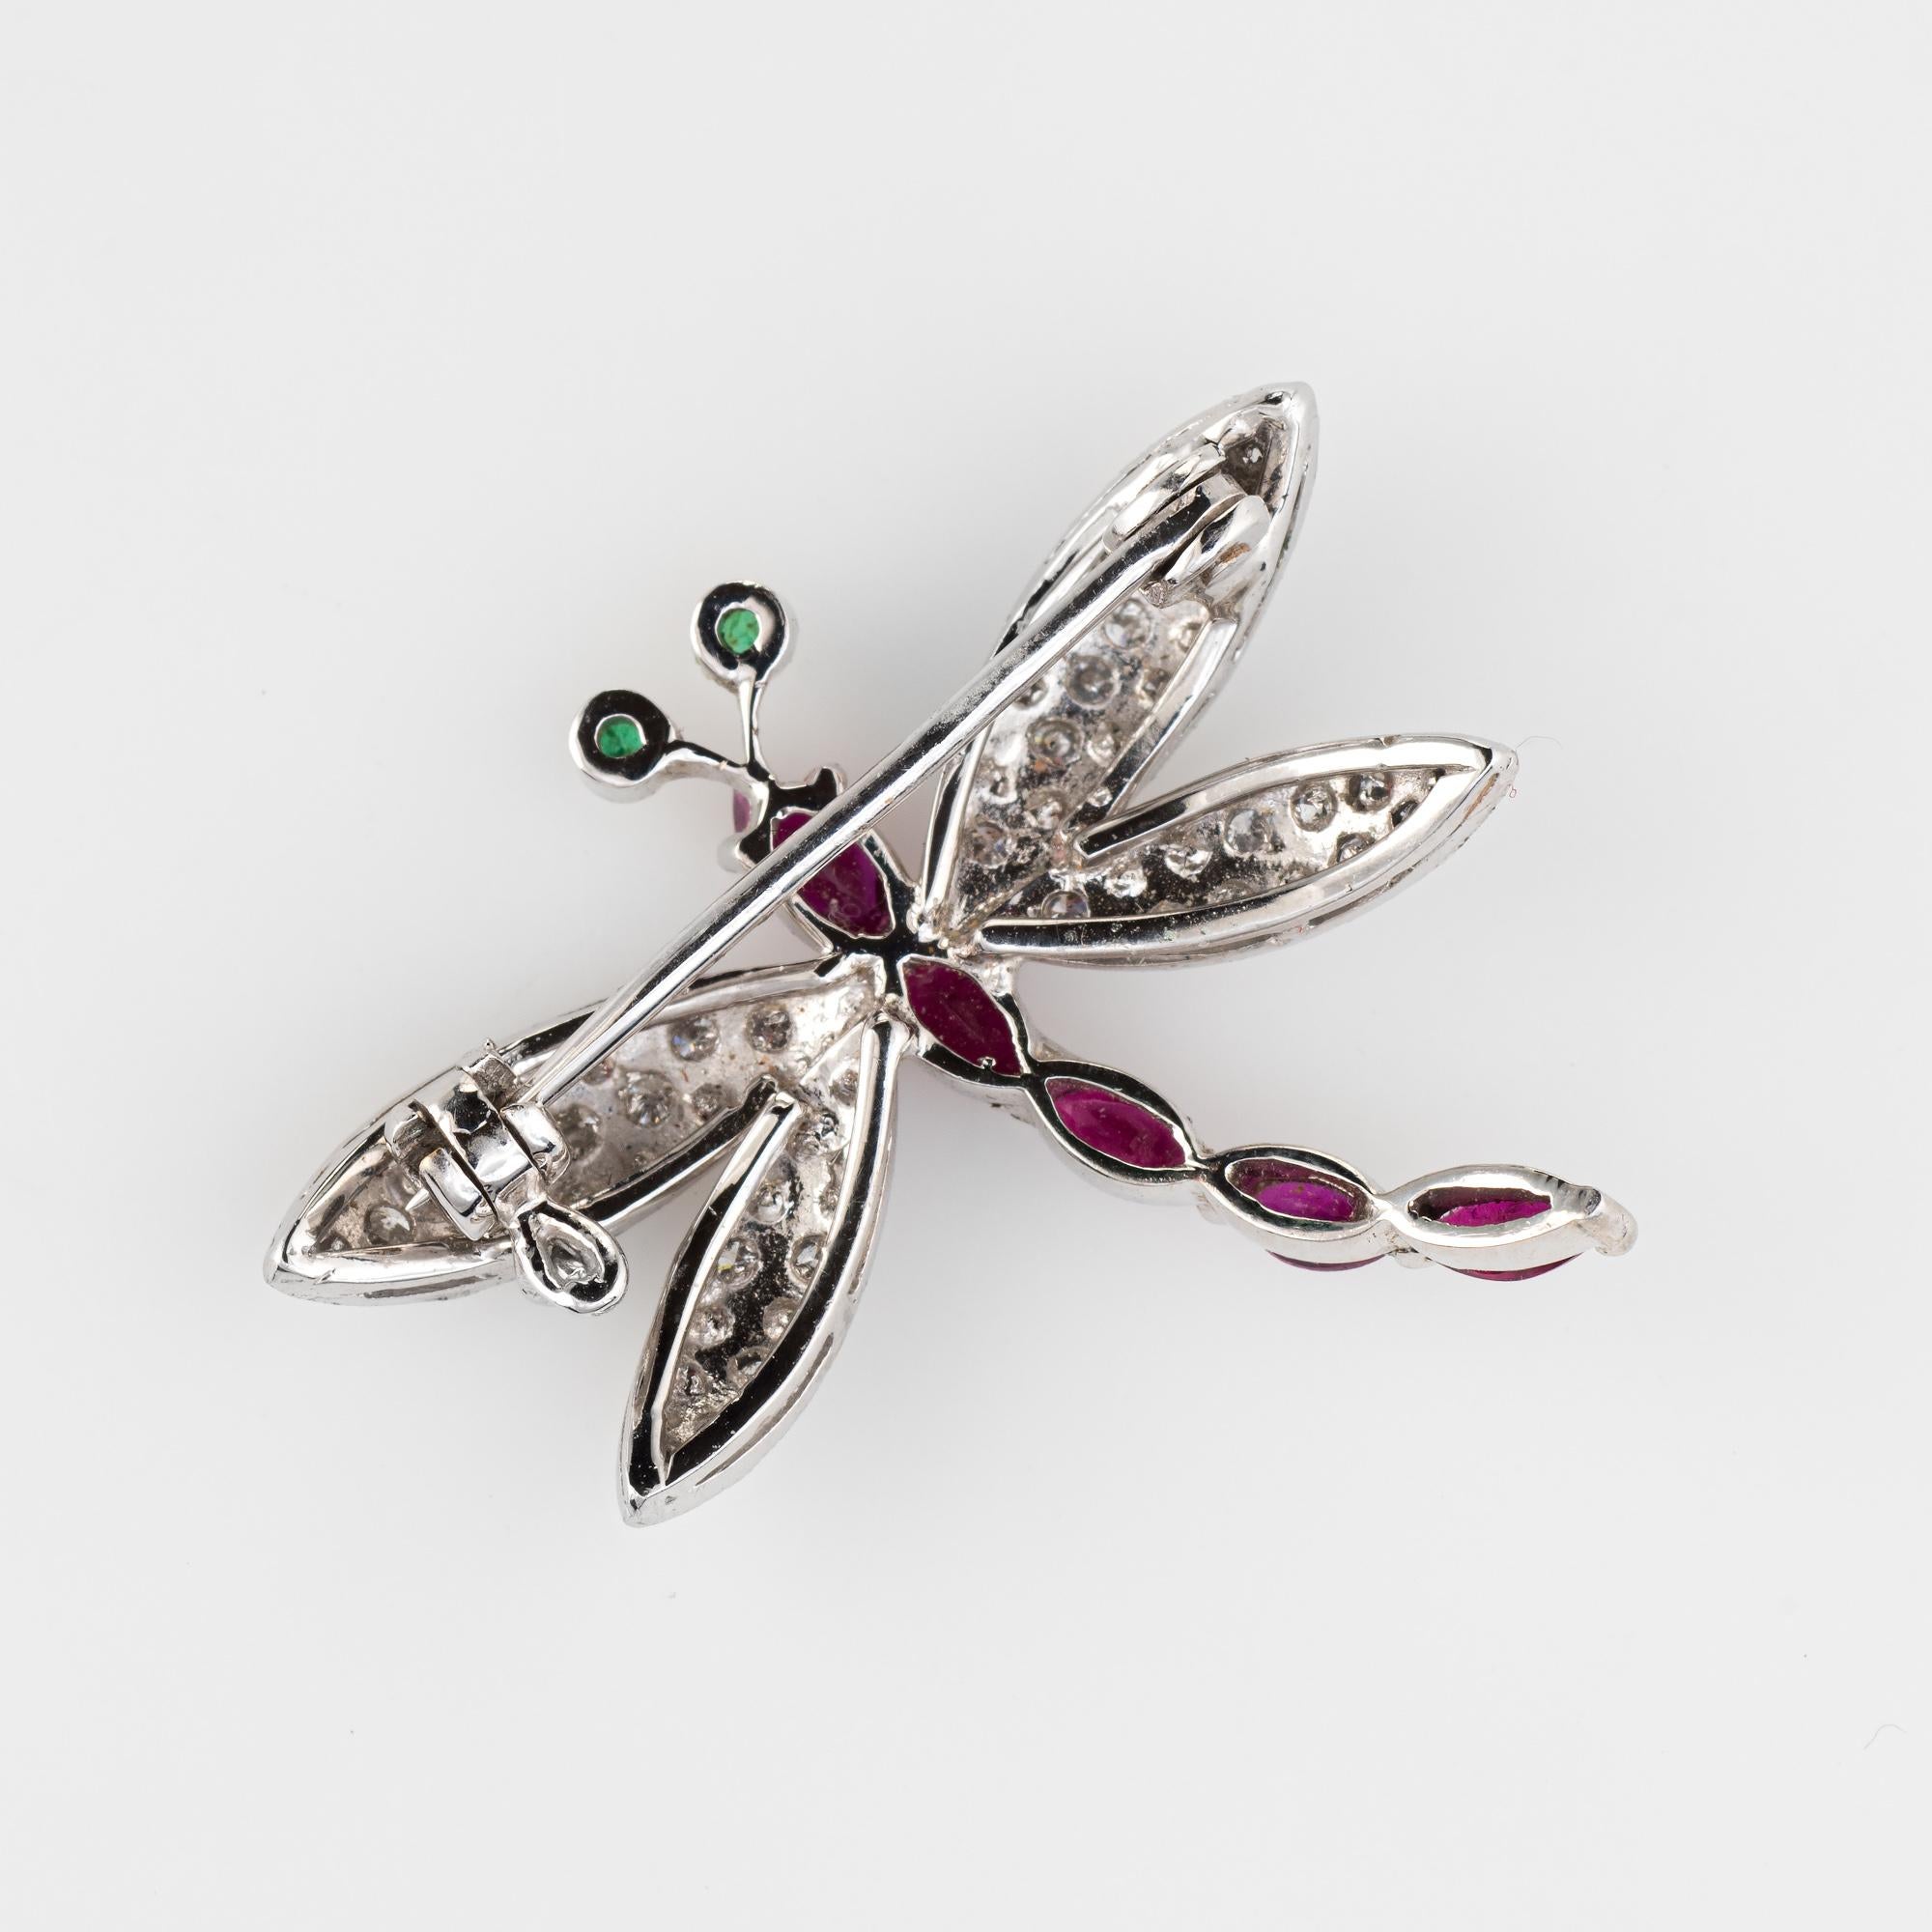 Finely detailed gemstone dragonfly brooch crafted in 18 karat white gold.  

Diamonds total an estimated 0.57 carats (estimated at H-I color and VS2-SI2 clarity). Five marquise cut rubies graduate in size from 0.05 to 0.15 carats. The total ruby